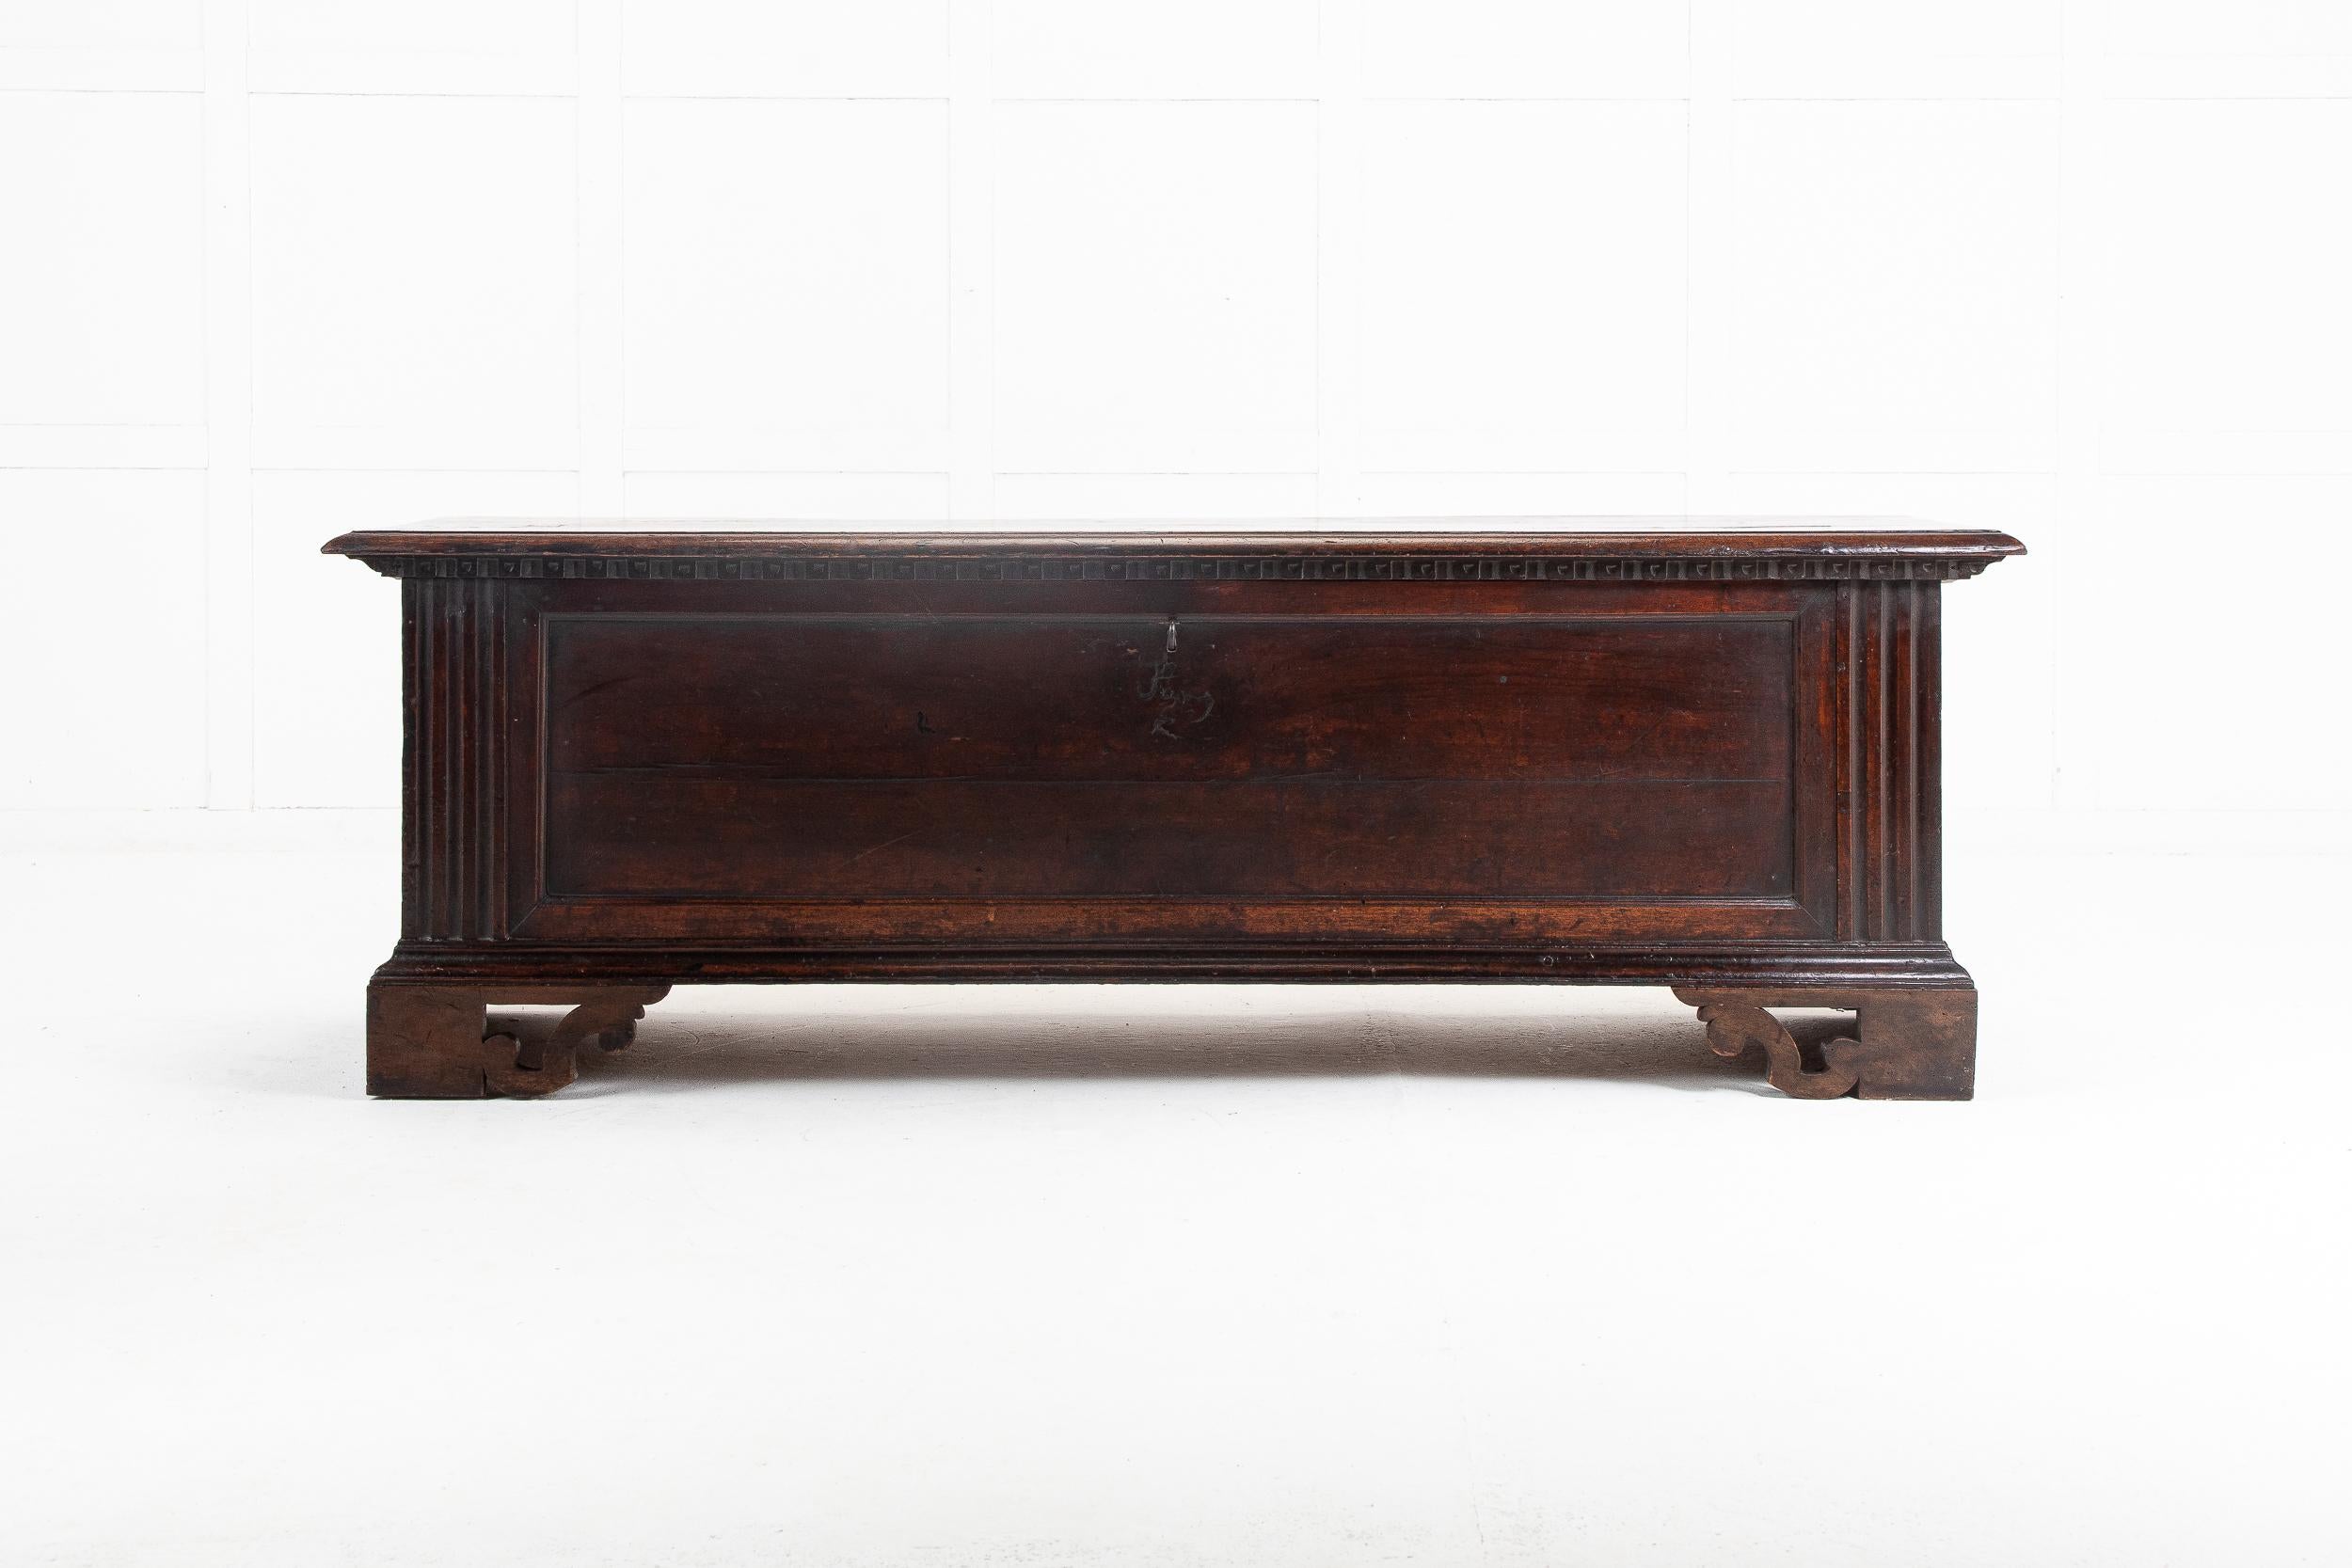 18th Century Italian walnut coffer of generous size. Having three planks for the top and carved moulding under the lid with iron hinges. Inside is lined with old paper. The front panel is plain and flanked by large grooved panels. Panelled sides and